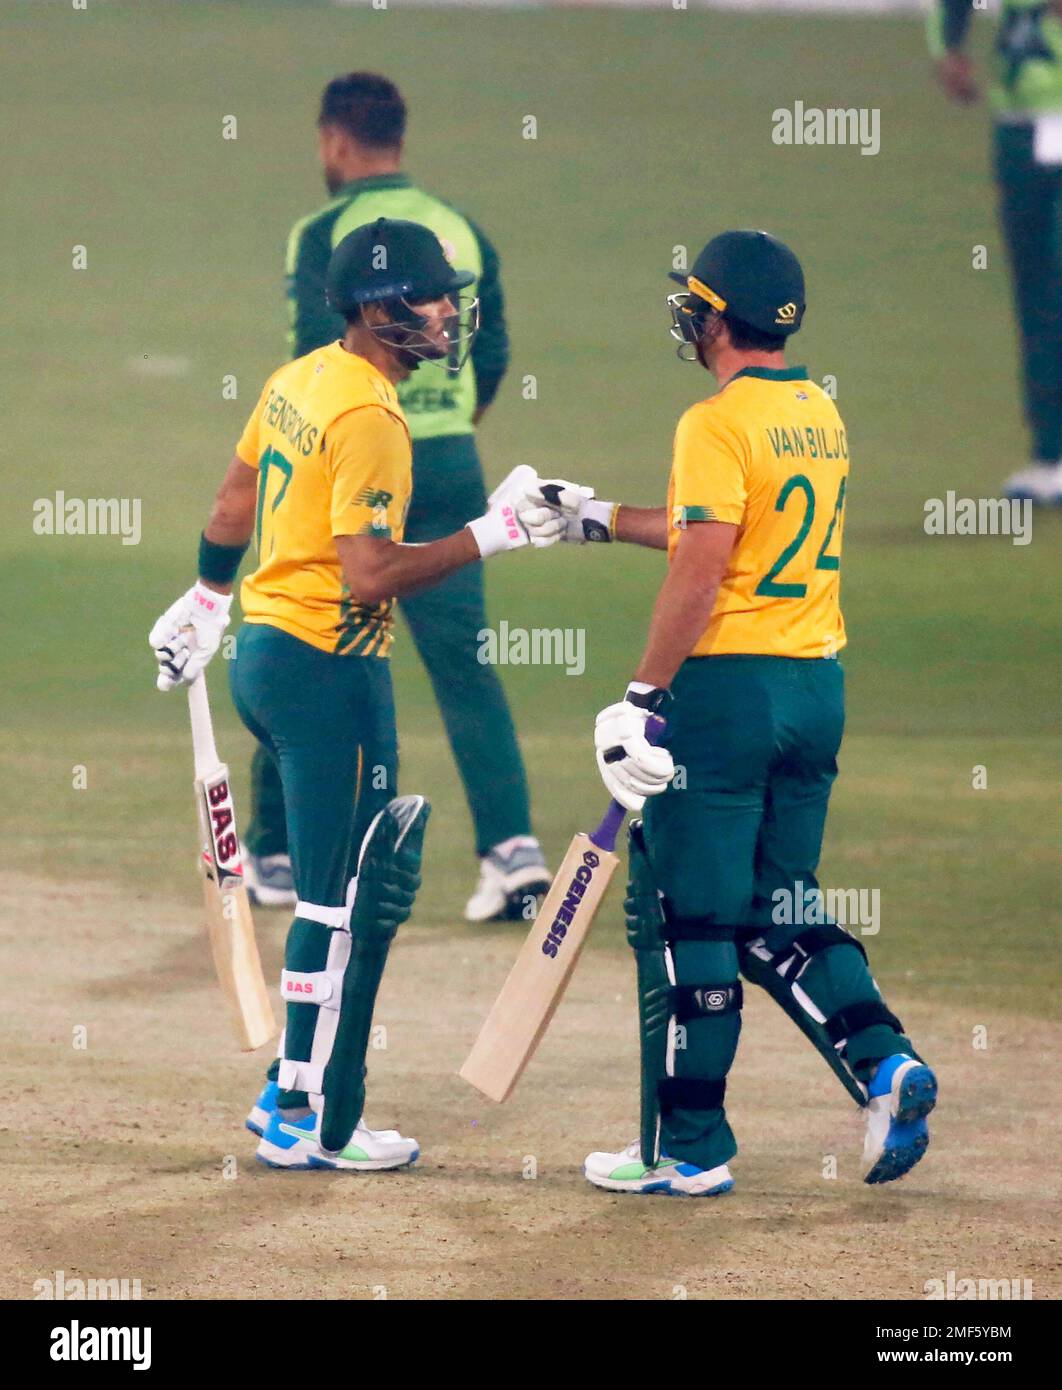 South Africa's Pite van Biljon, right, celebrates with teammate Reeza  Hendricks after hitting a boundary during the 2nd Twenty20 cricket match  between Pakistan and South Africa at the Gaddafi Stadium, in Lahore,